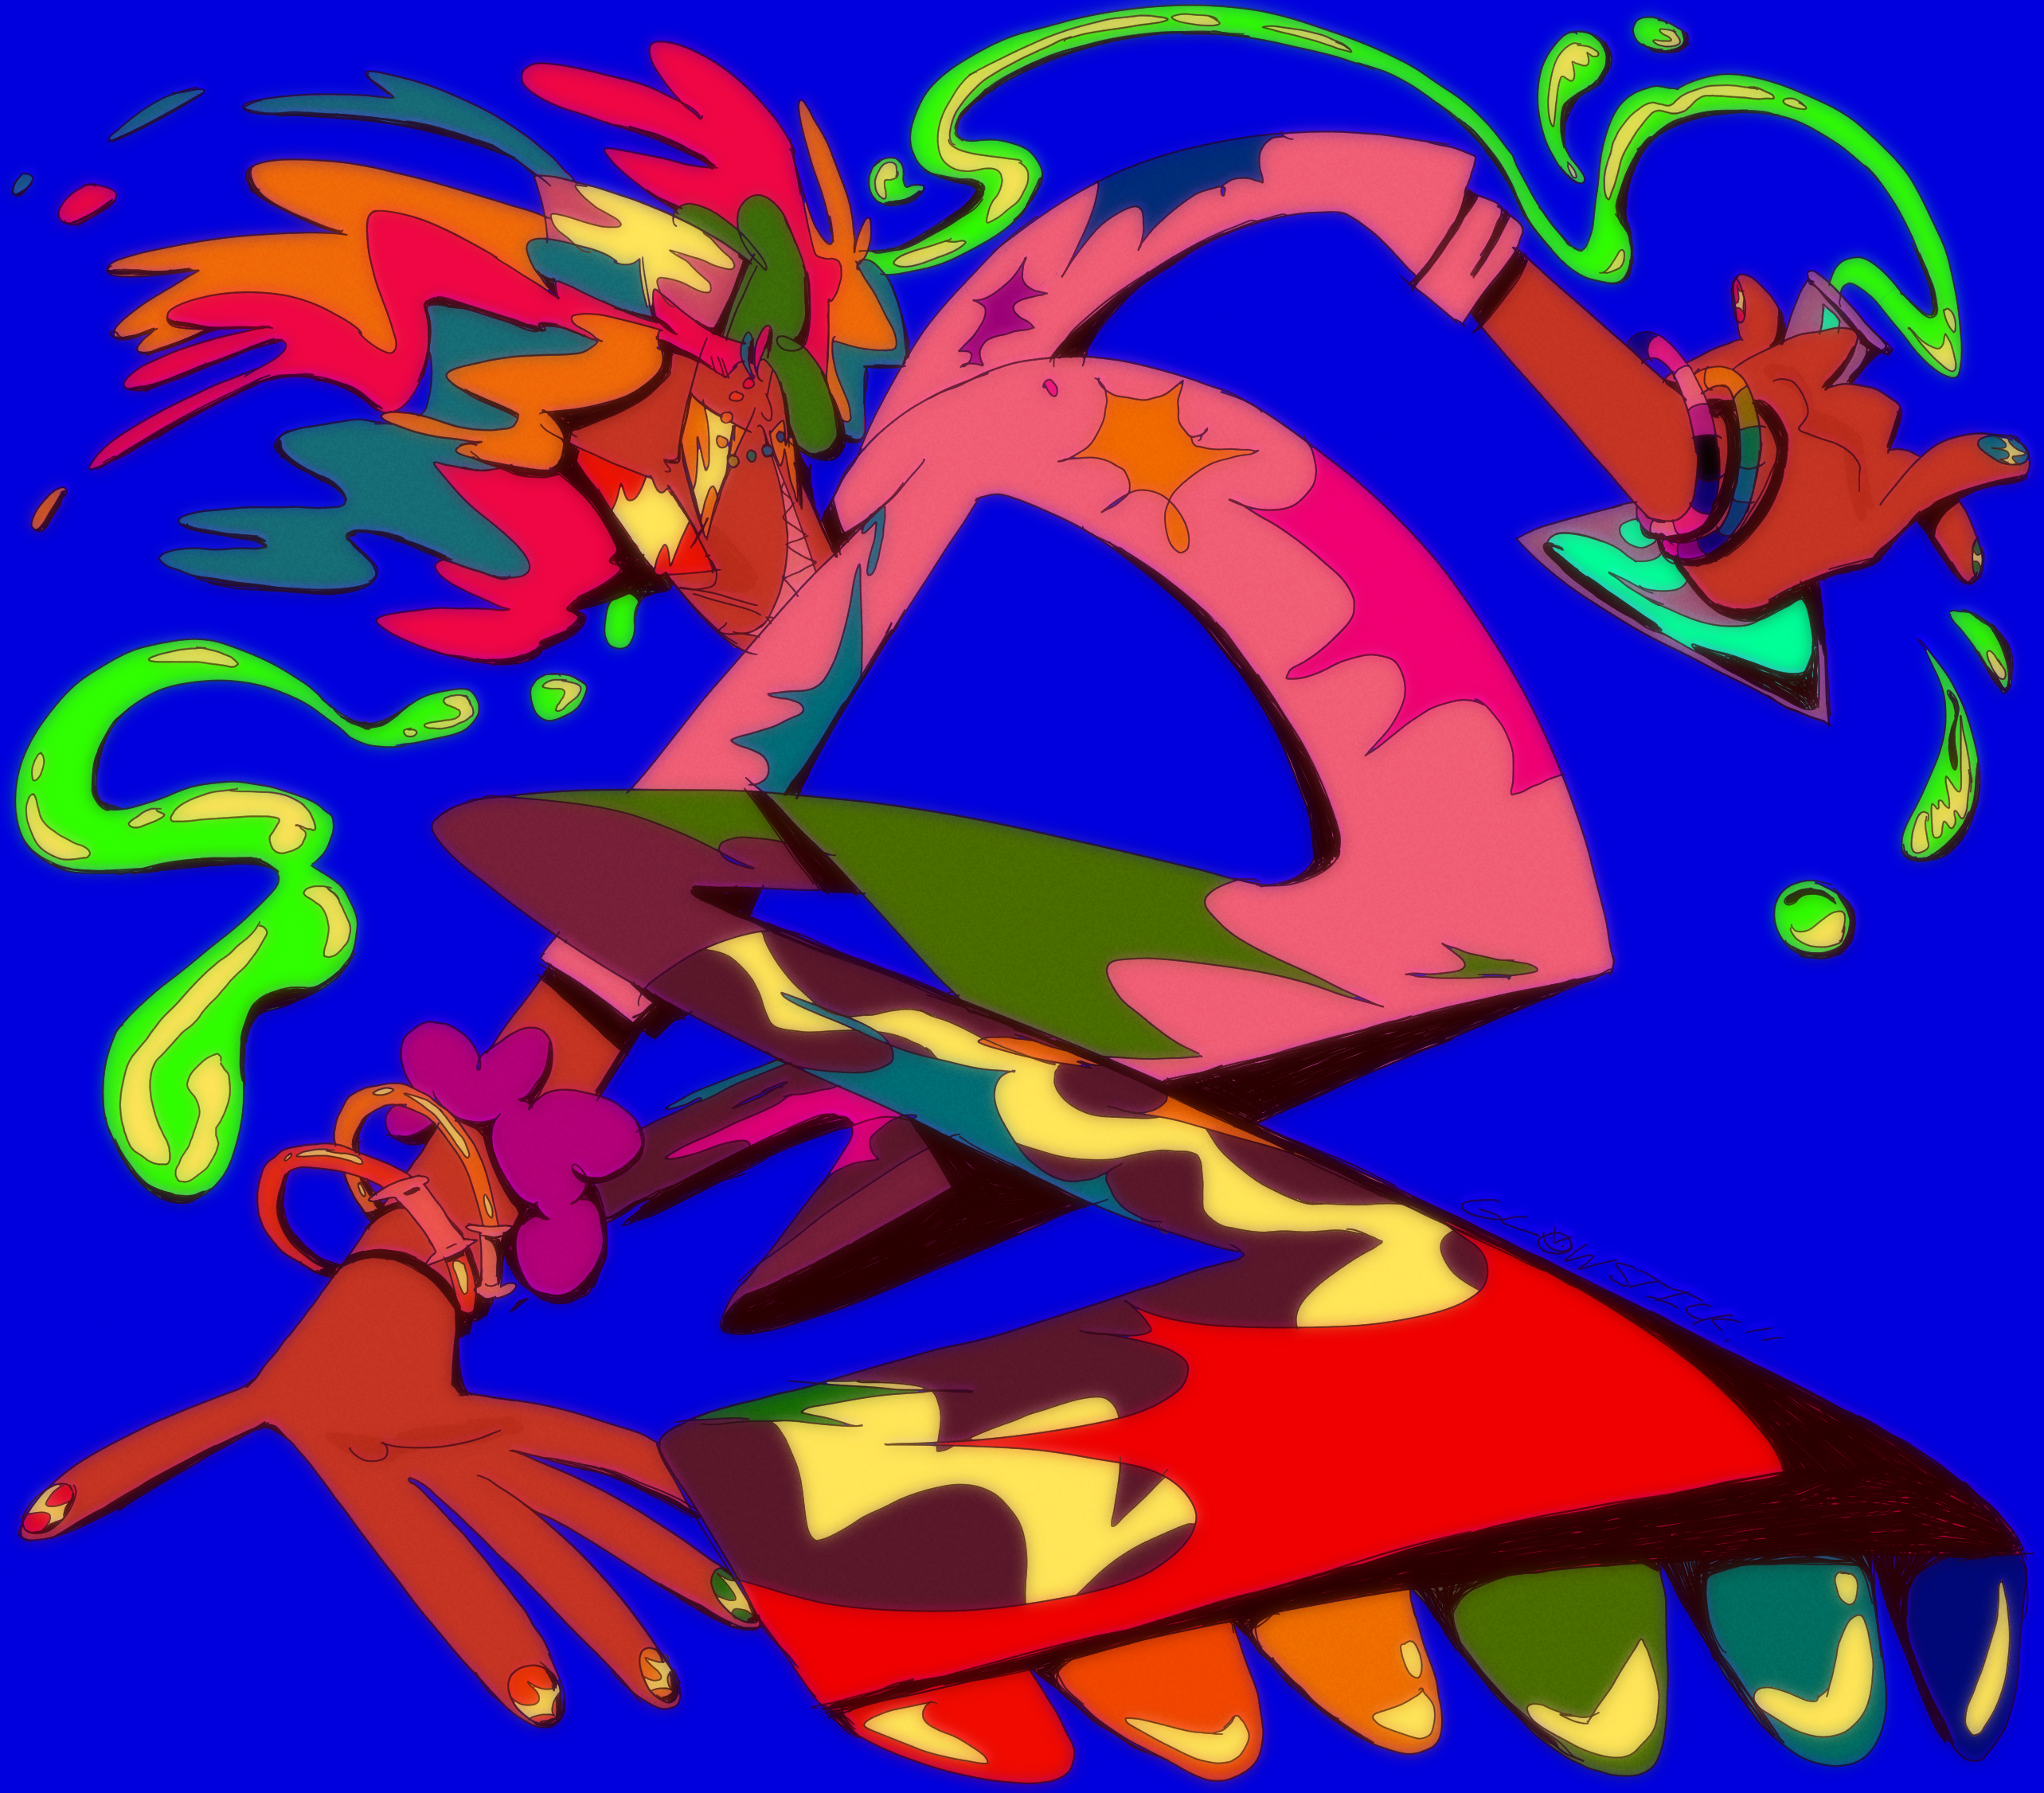 A brightly-colored drawing of Zap, a person with brown skin and yellow, blue, and pink-striped hair. She's crouched down in an action pose, as if getting ready to jump or throw something, and is holding an earlyn meyer spilling bright green liquid.